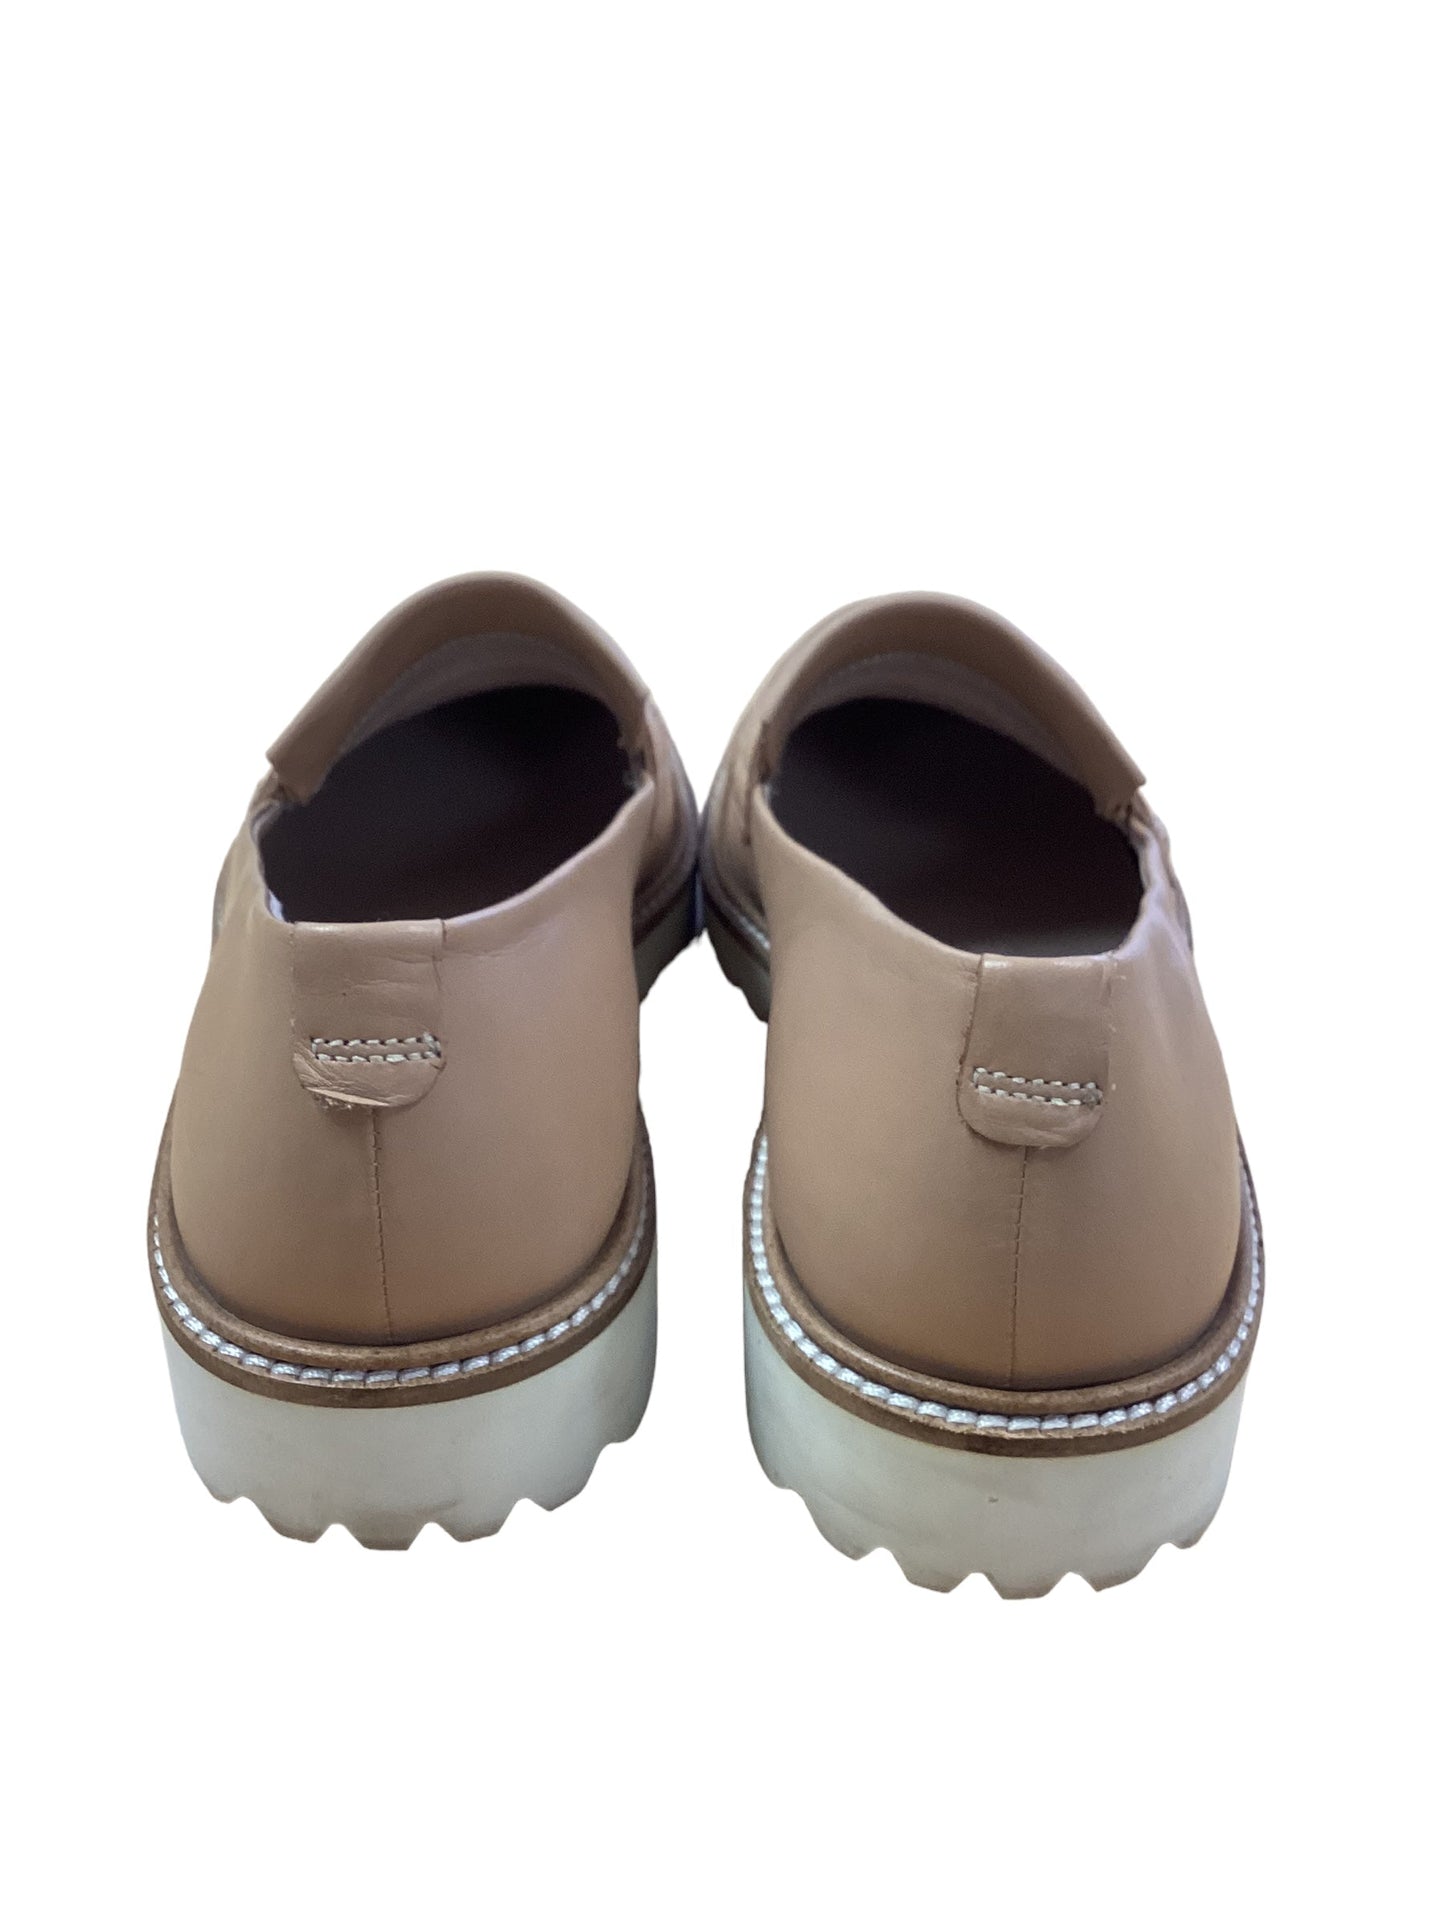 Shoes Flats By Ecco  Size: 6